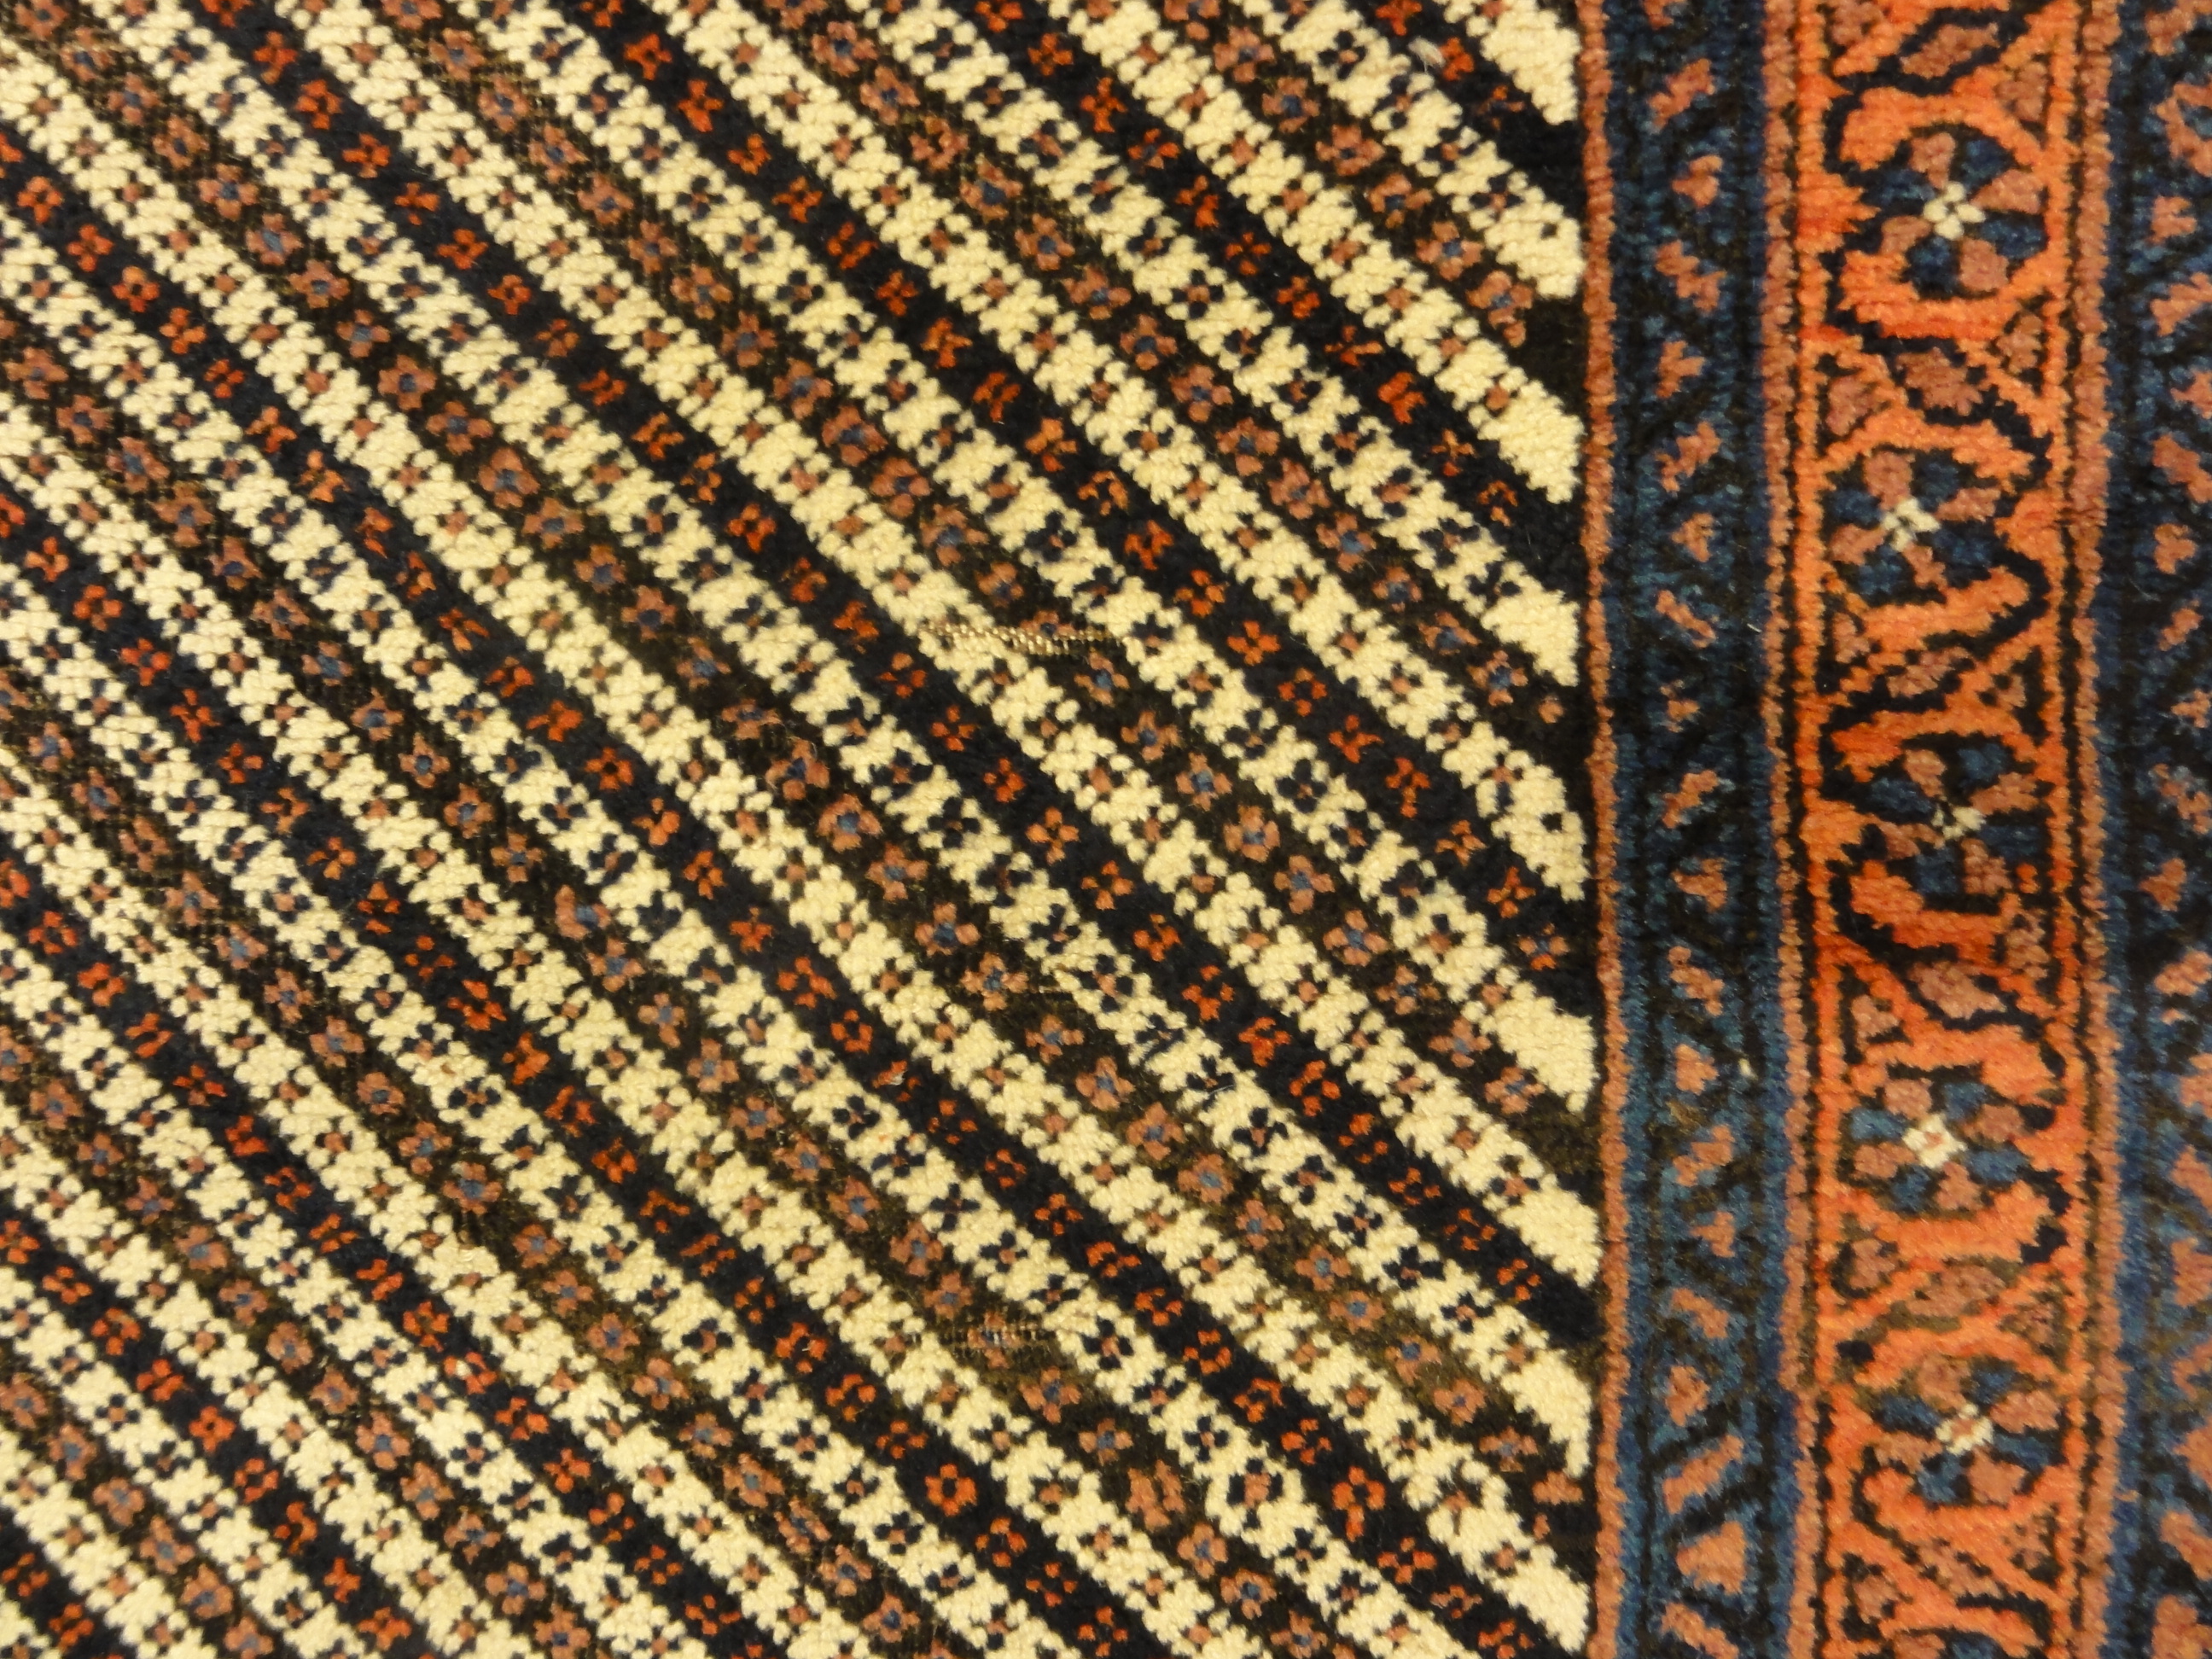 Unique Antique Persian Beluch Rug Rugs & More Santa Barbara Design Center. Primarily recognized by their exceptional wool quality and color combination.